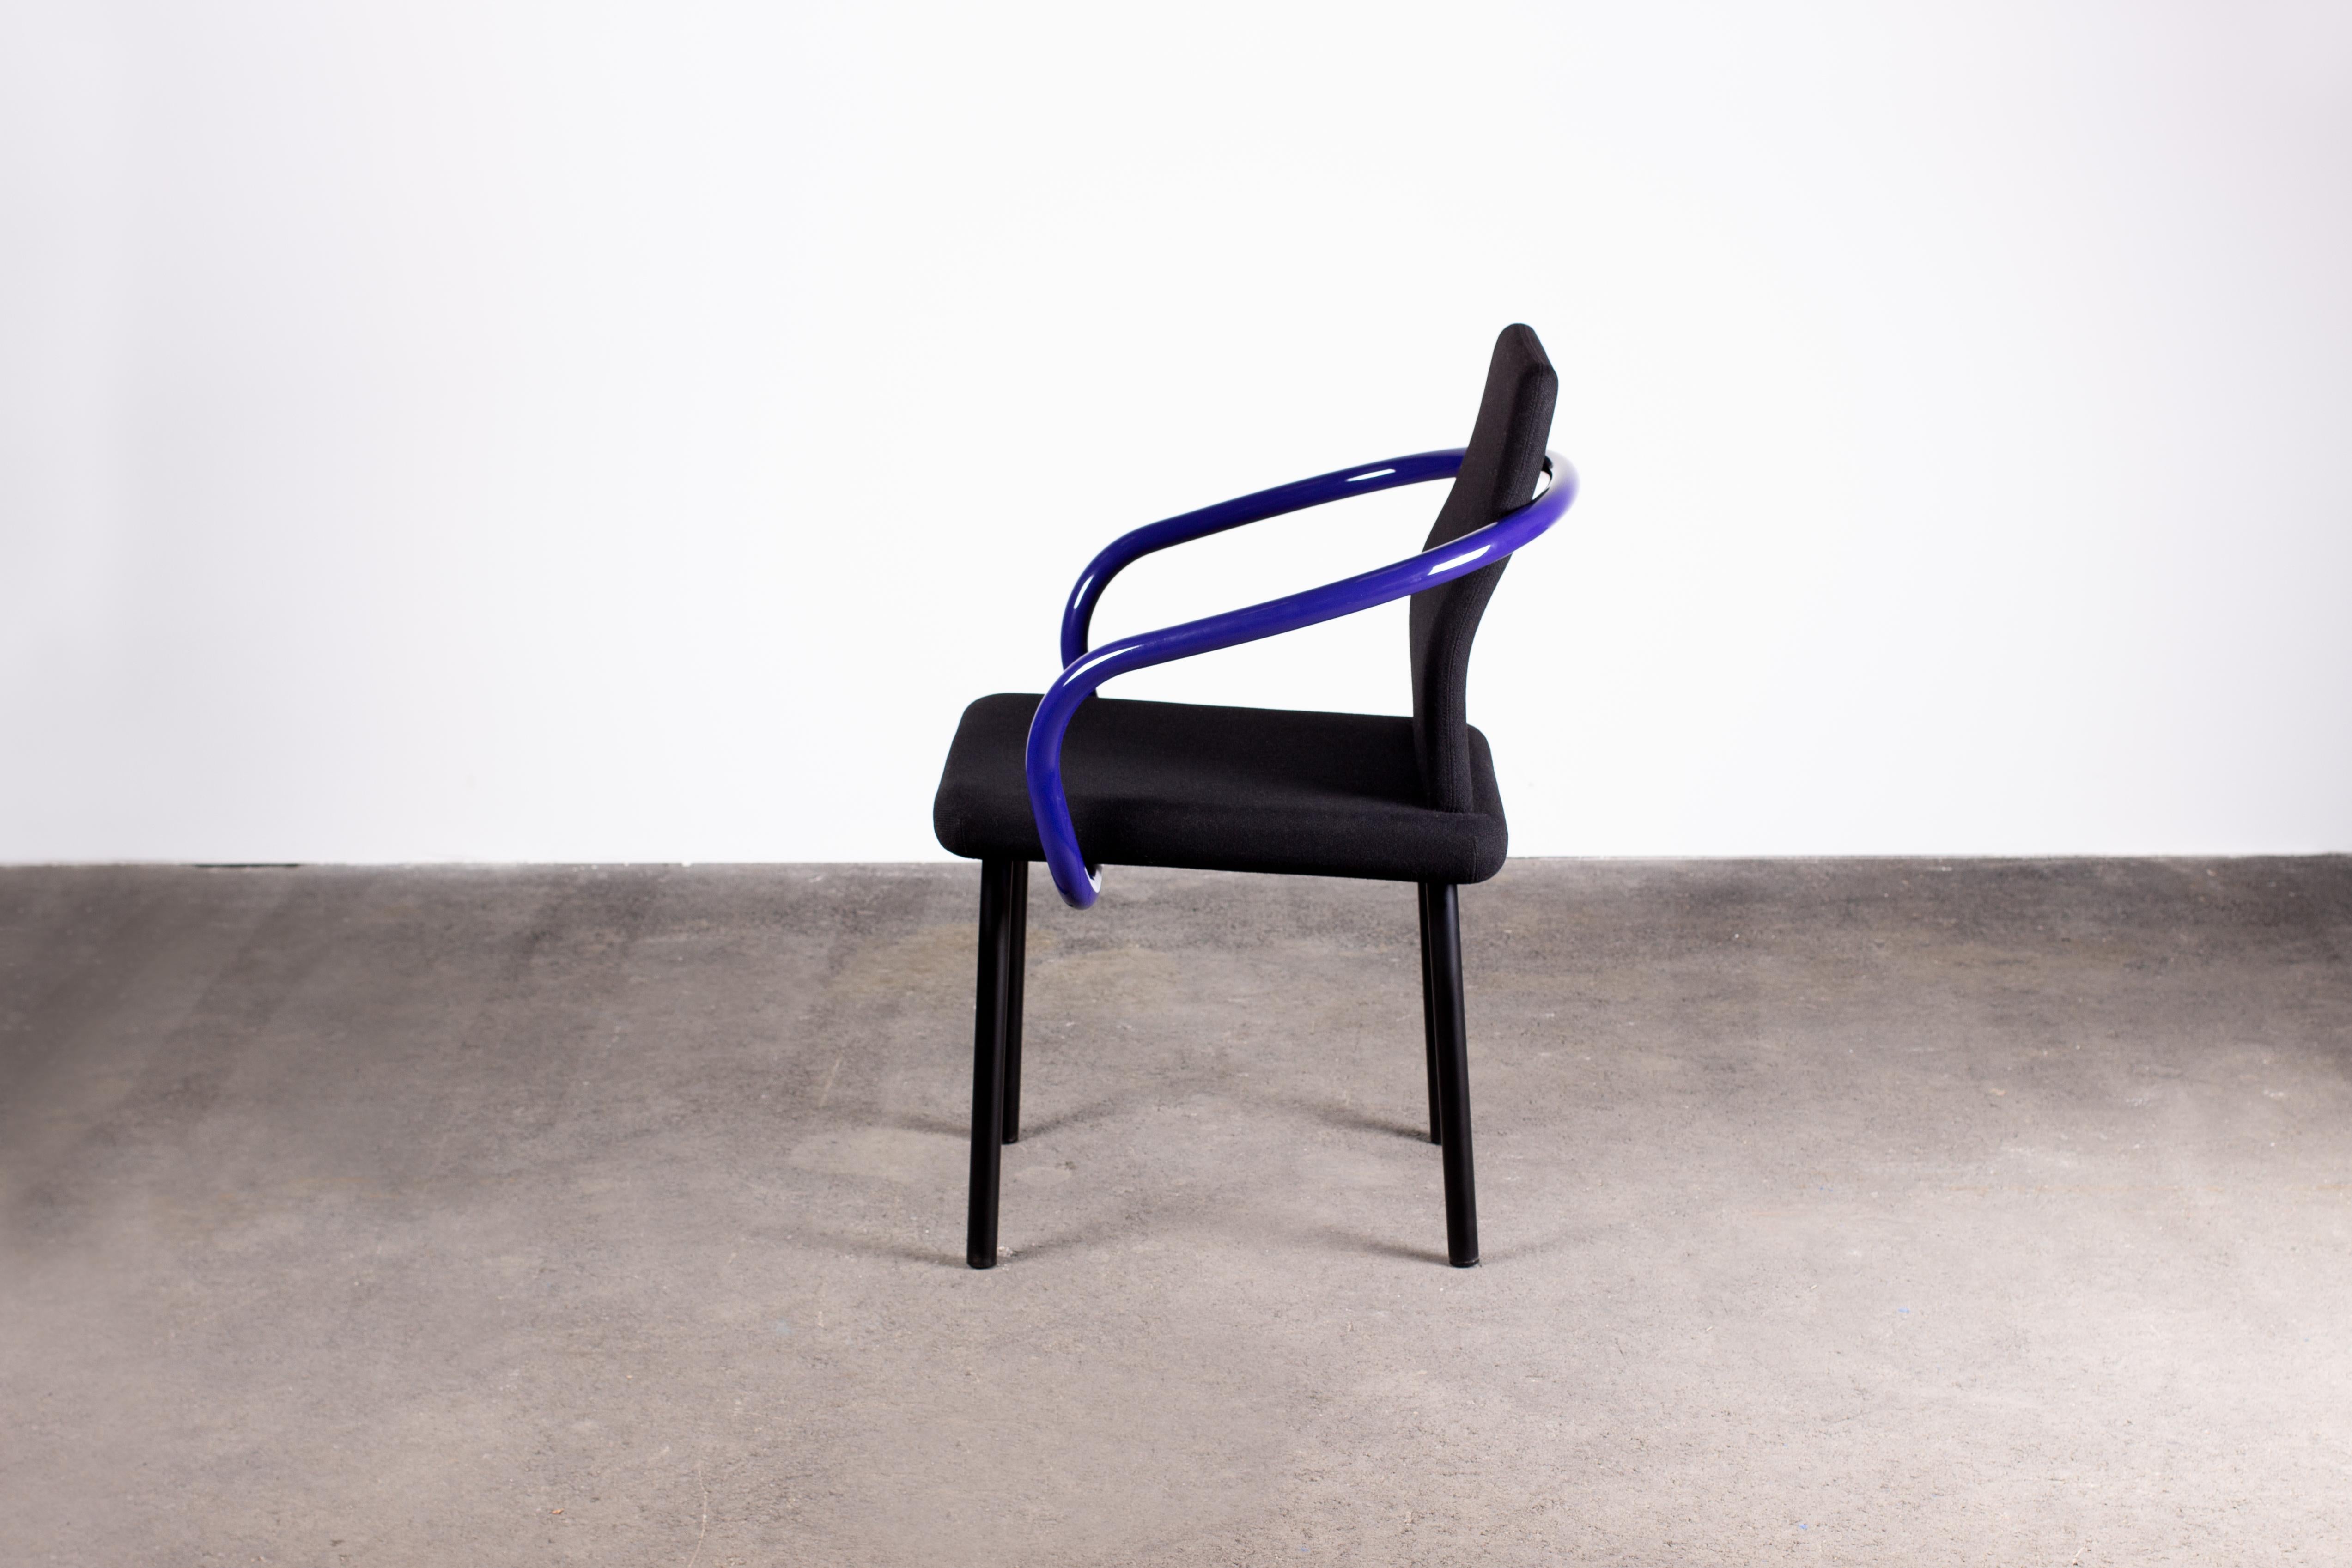 Late 20th Century Pair of Ettore Sottsass Mandarin Chairs for Knoll in Violet & Black